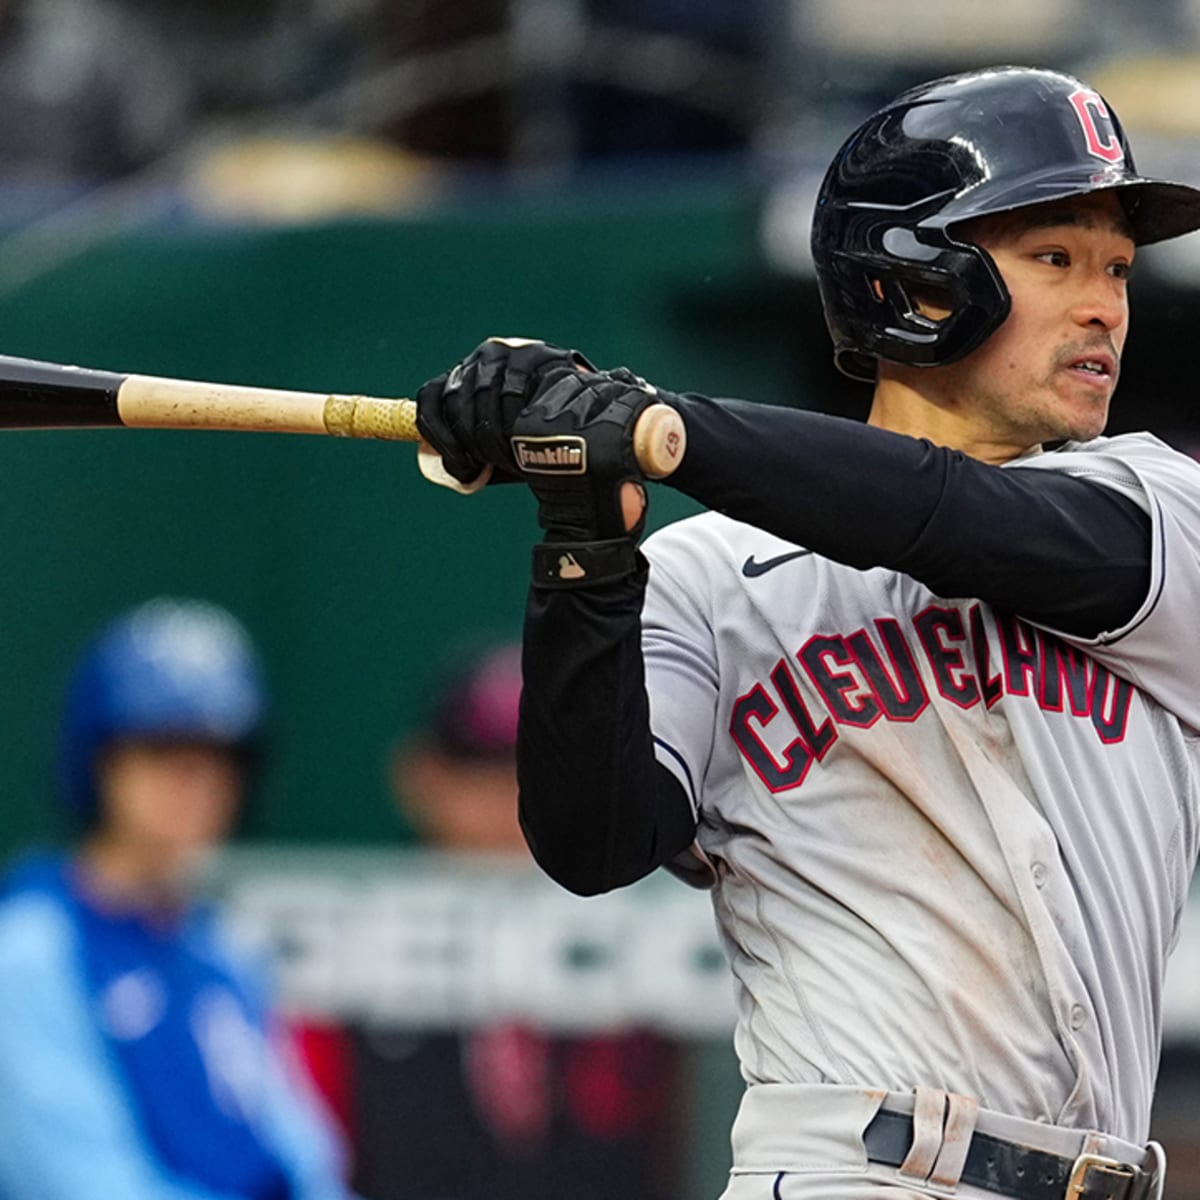 The improbable story of Steven Kwan: A Gold Glove Rookie Season for the  Cleveland Guardians 